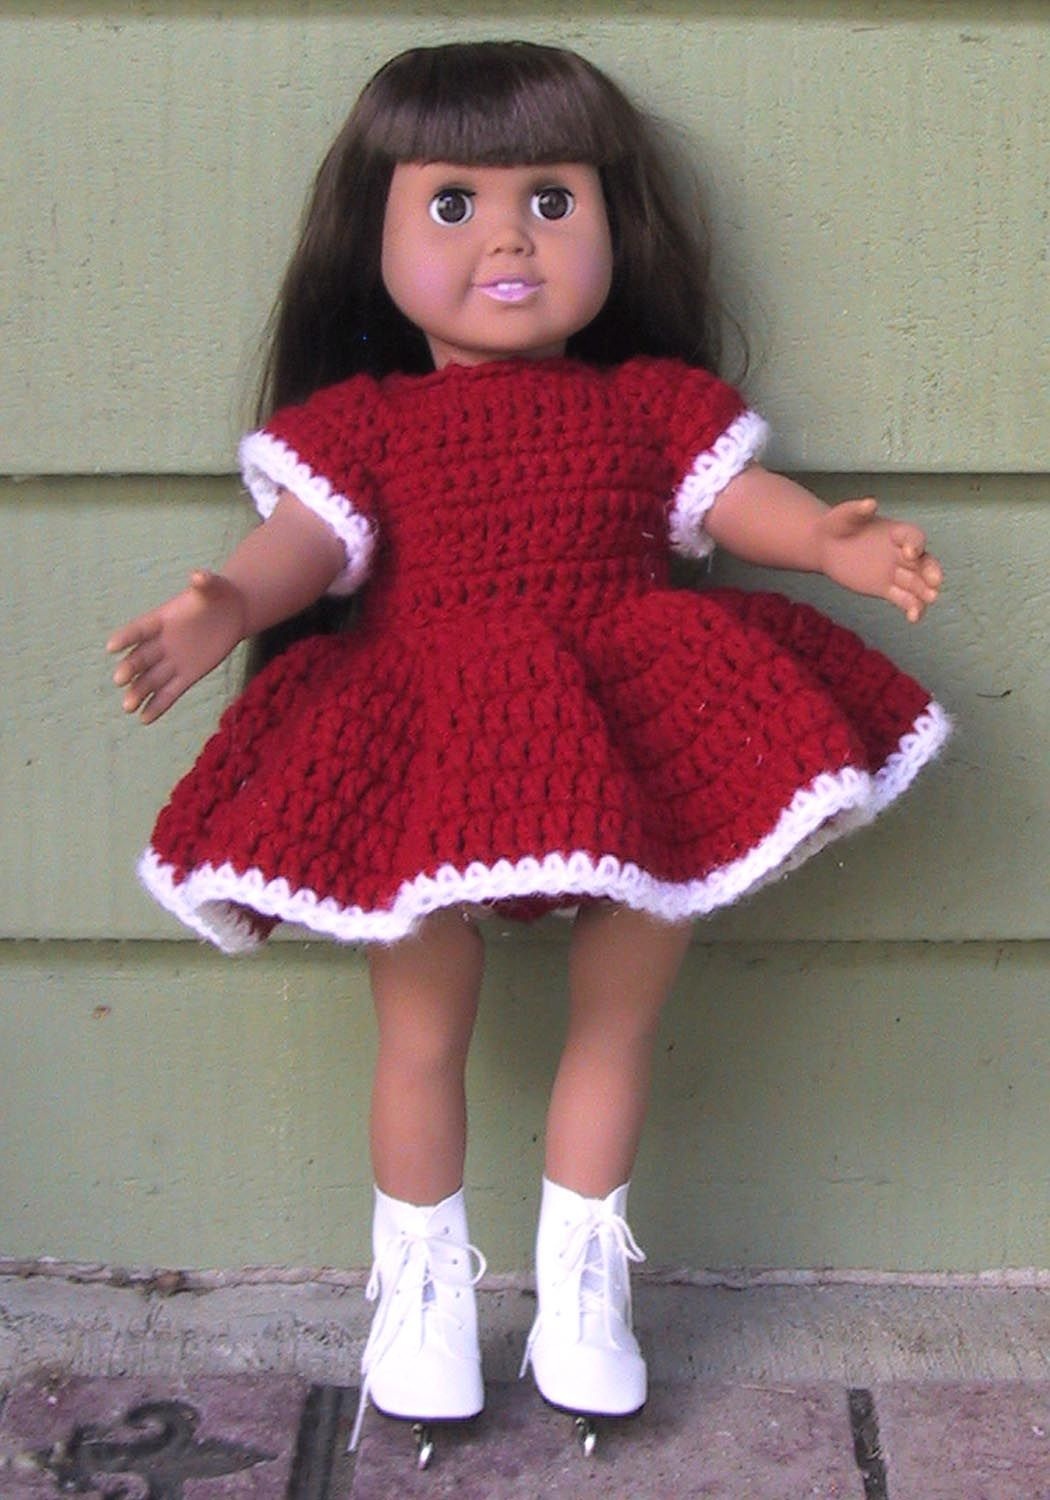 American Girl Dolls And 18 Inch Doll Clothes Free Crochet Patterns - Free Printable Crochet Doll Clothes Patterns For 18 Inch Dolls